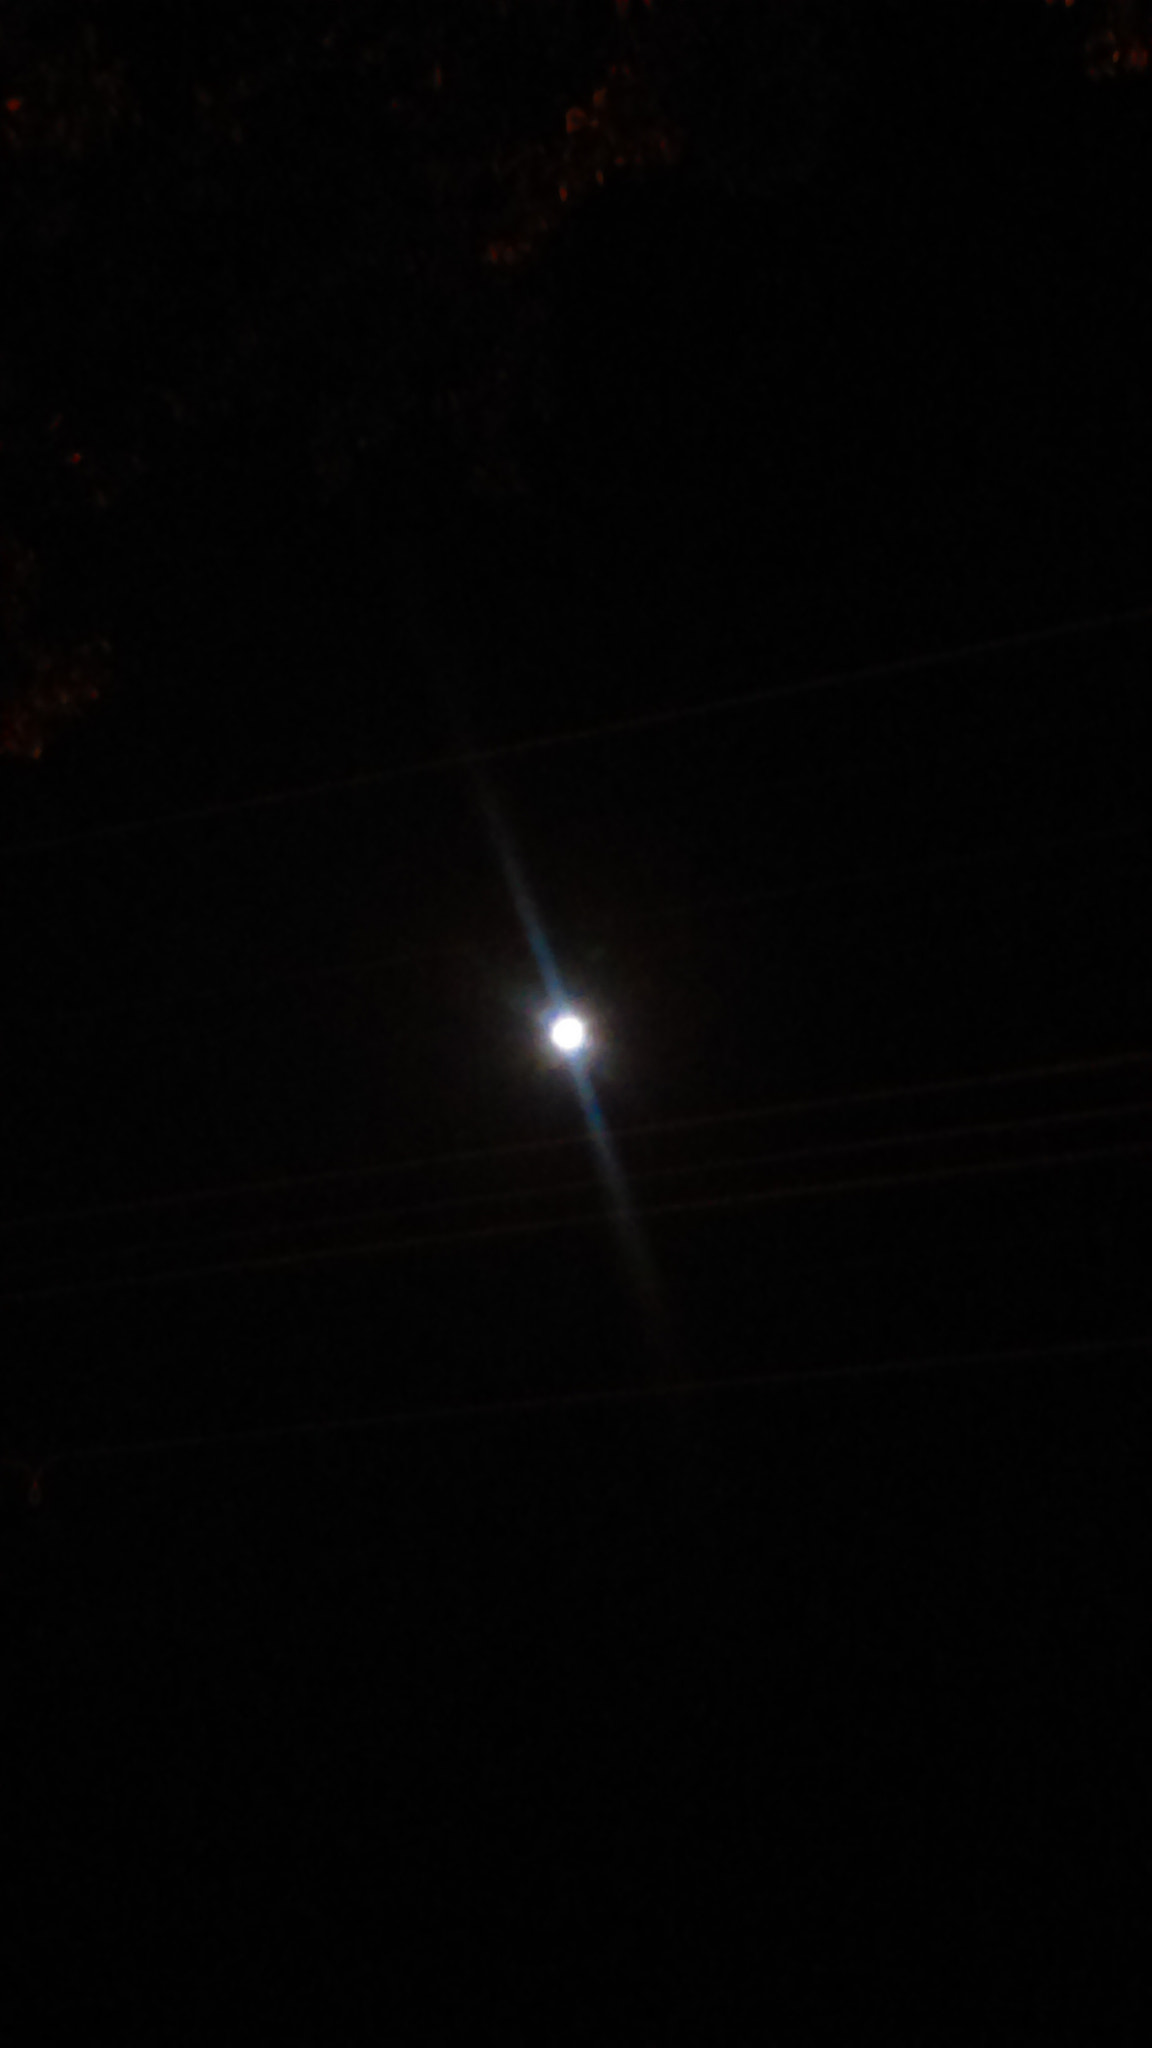 HTC DESRIE D530 sample photo. Settled in (lunar and powerlines) photography